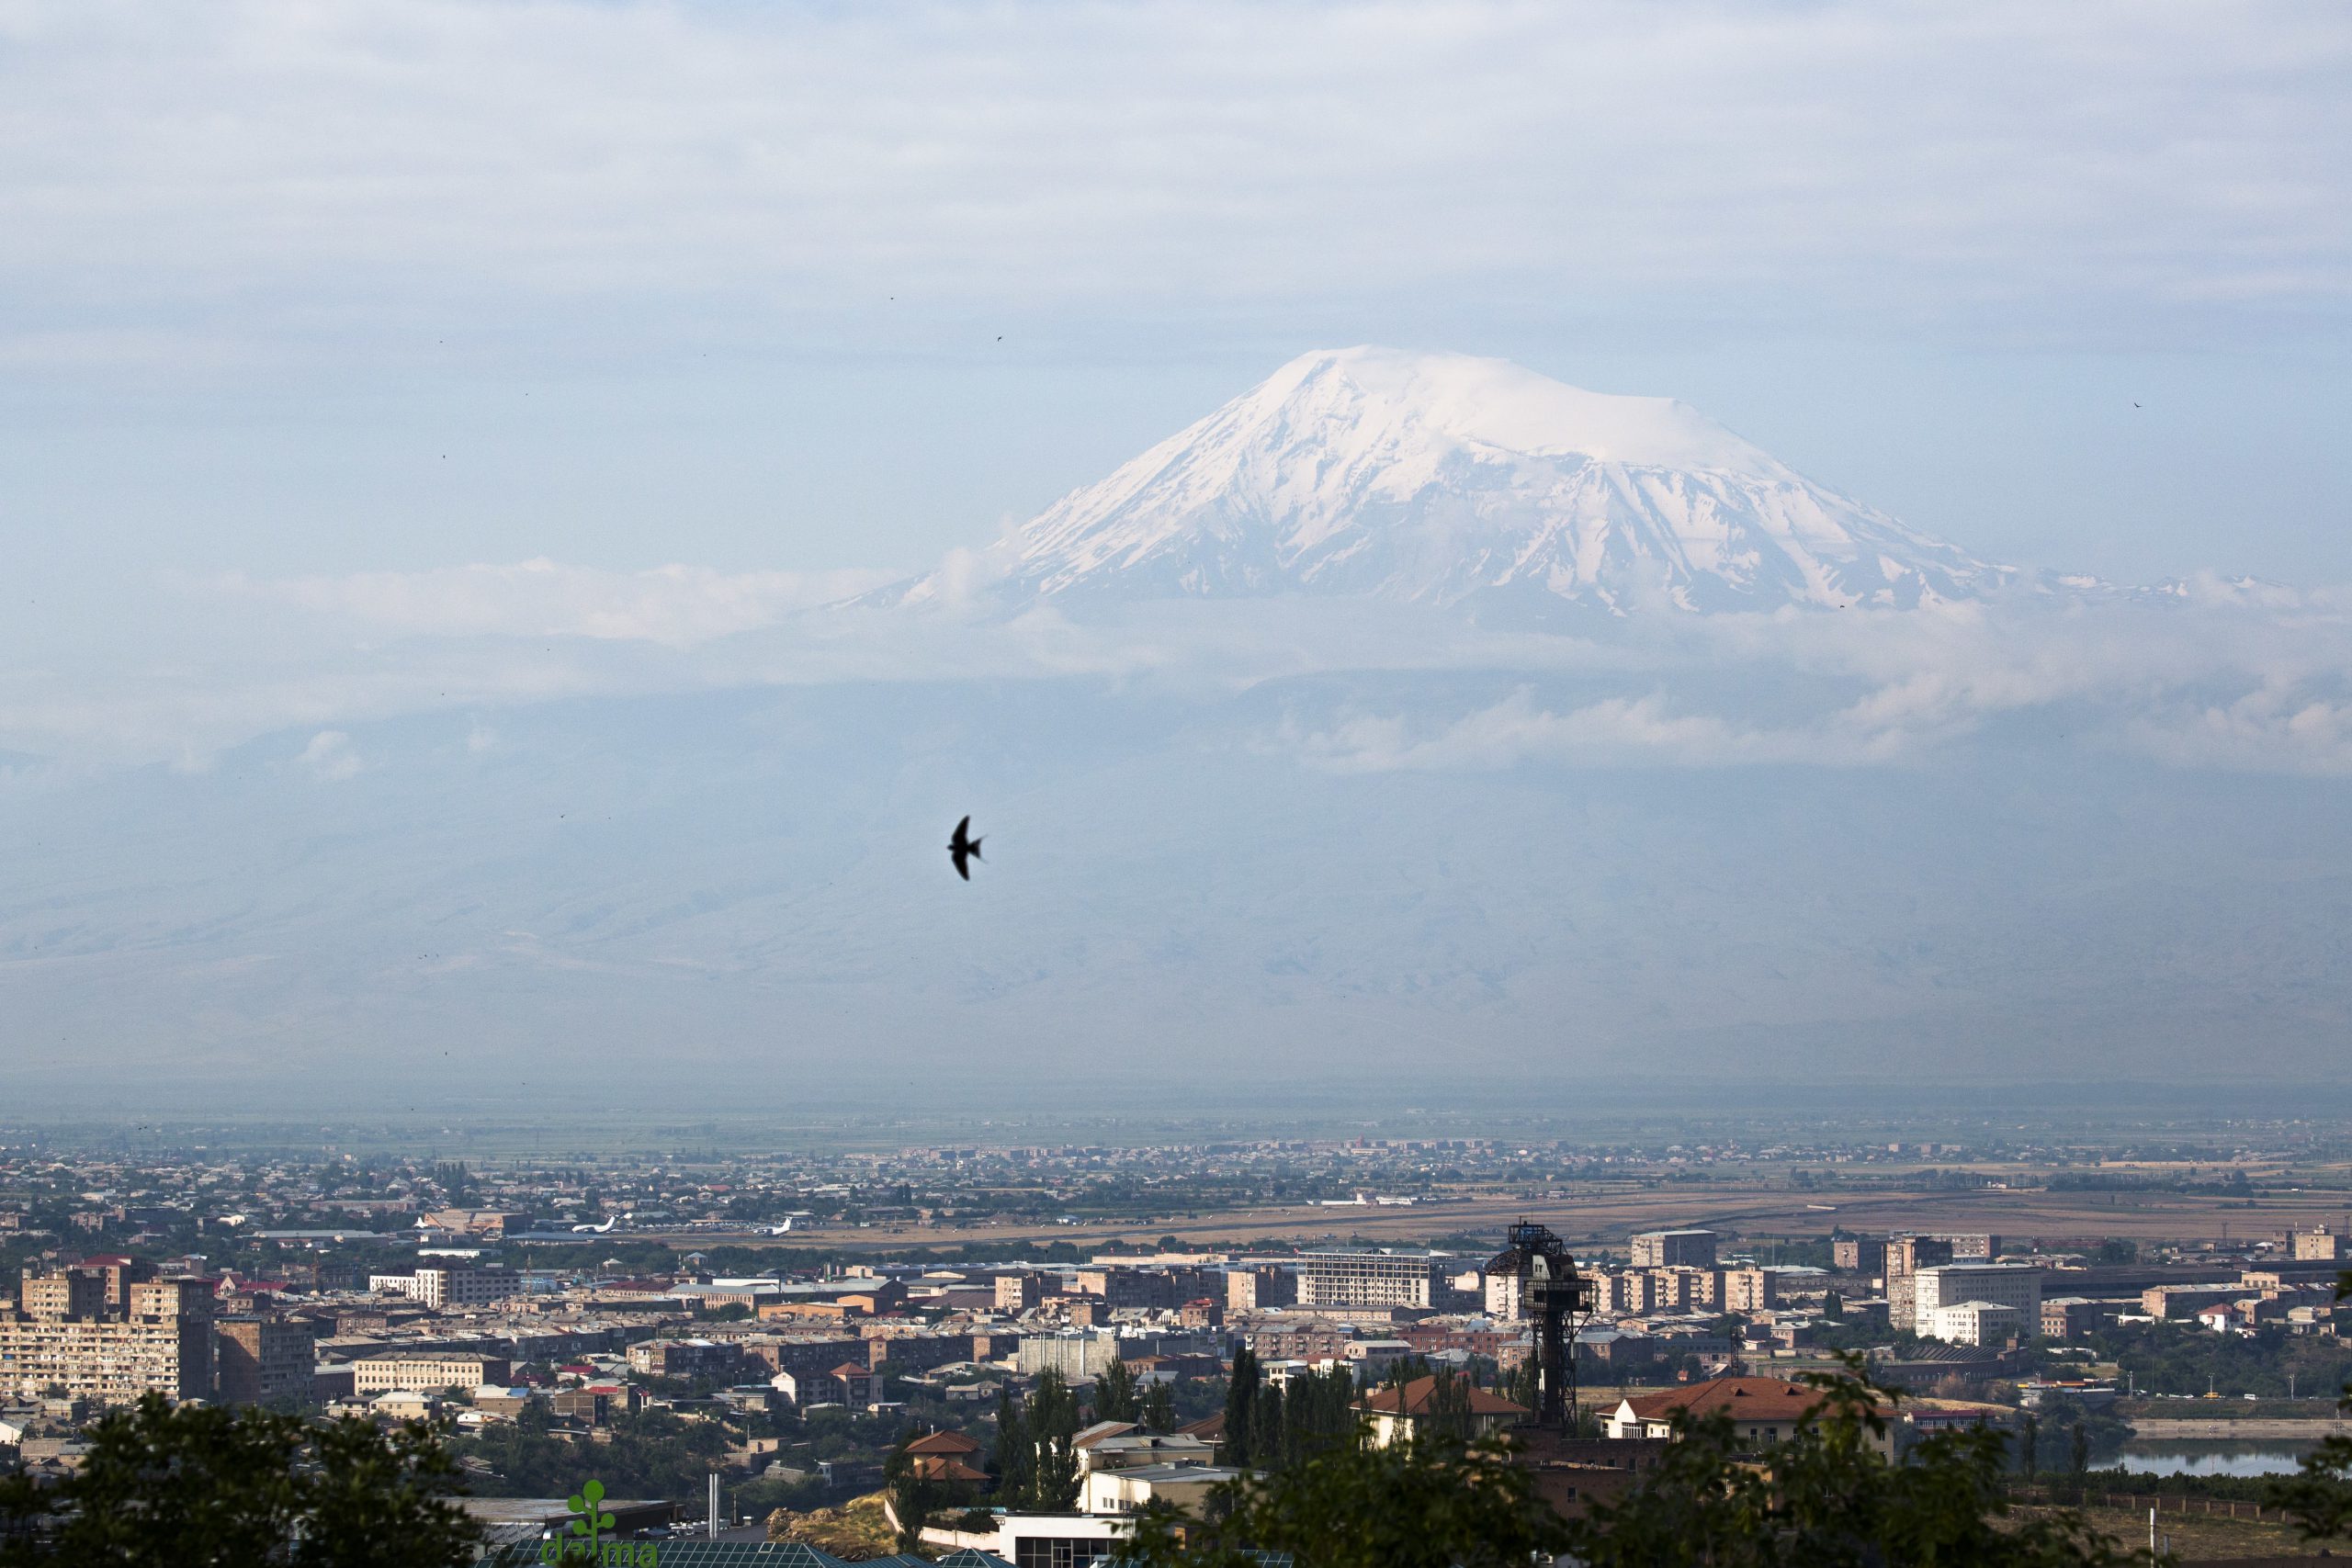 <p>If you decide to go to Armenia, book a long holiday because this destination is very affordable. A luxury apartment in Yerevan, its capital, can cost you about 250 US dollars a month. In rural areas the rent can go as low as $55. A very beautiful country to discover.</p>